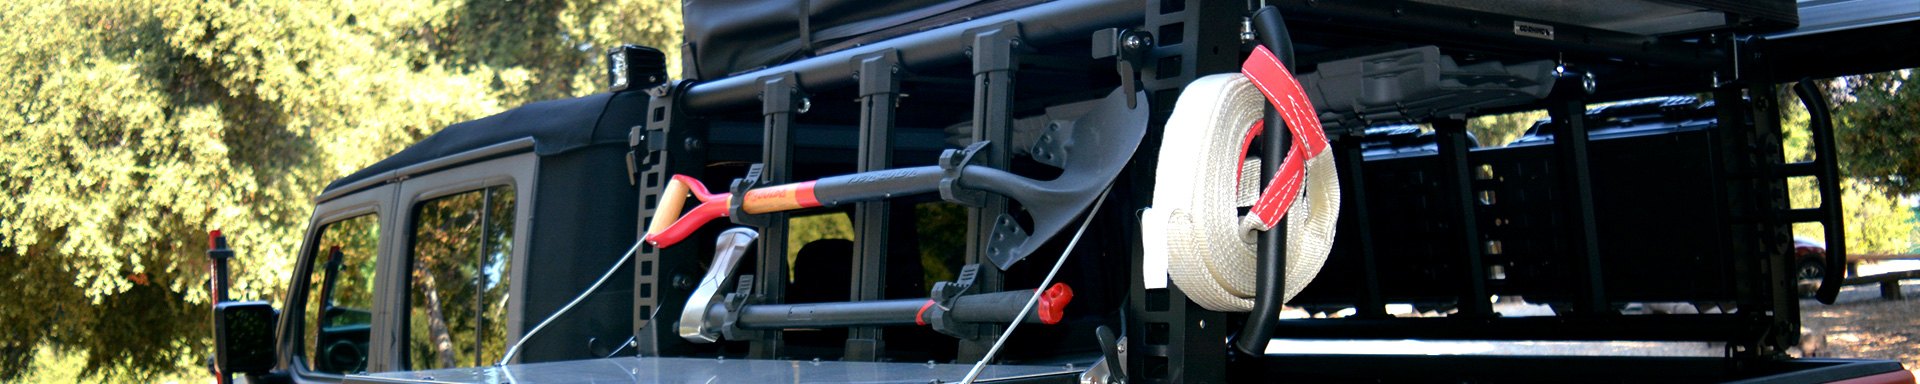 Transport Your Gear Safely With All-New Go Rhino XRS Xtreme Rack For JT